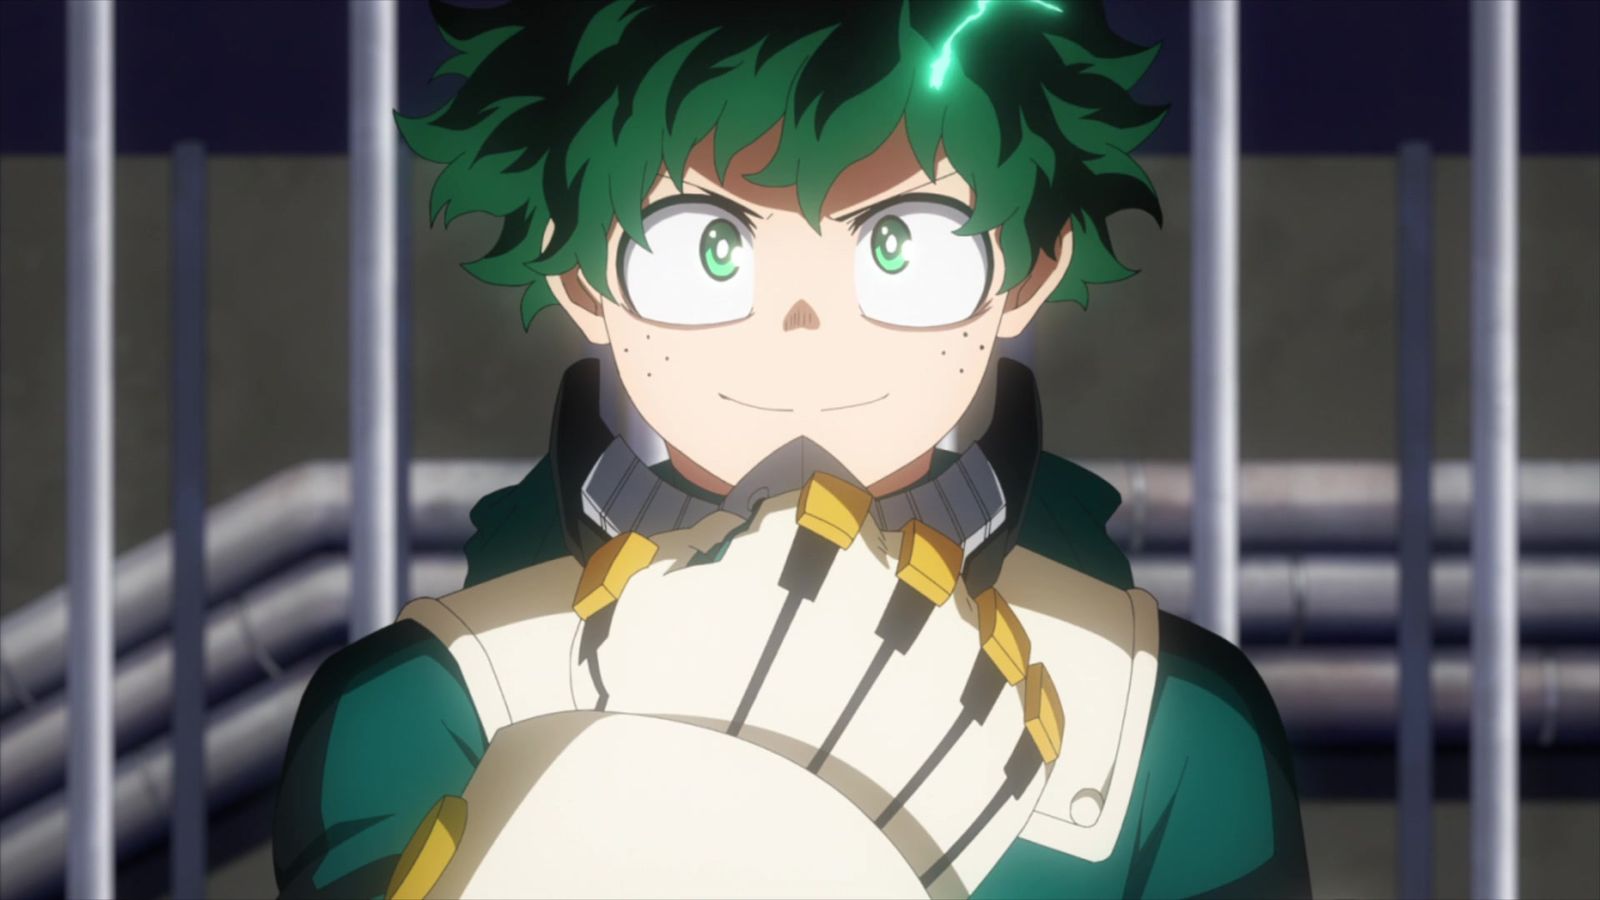 Deku smiling with his fist up across his chest